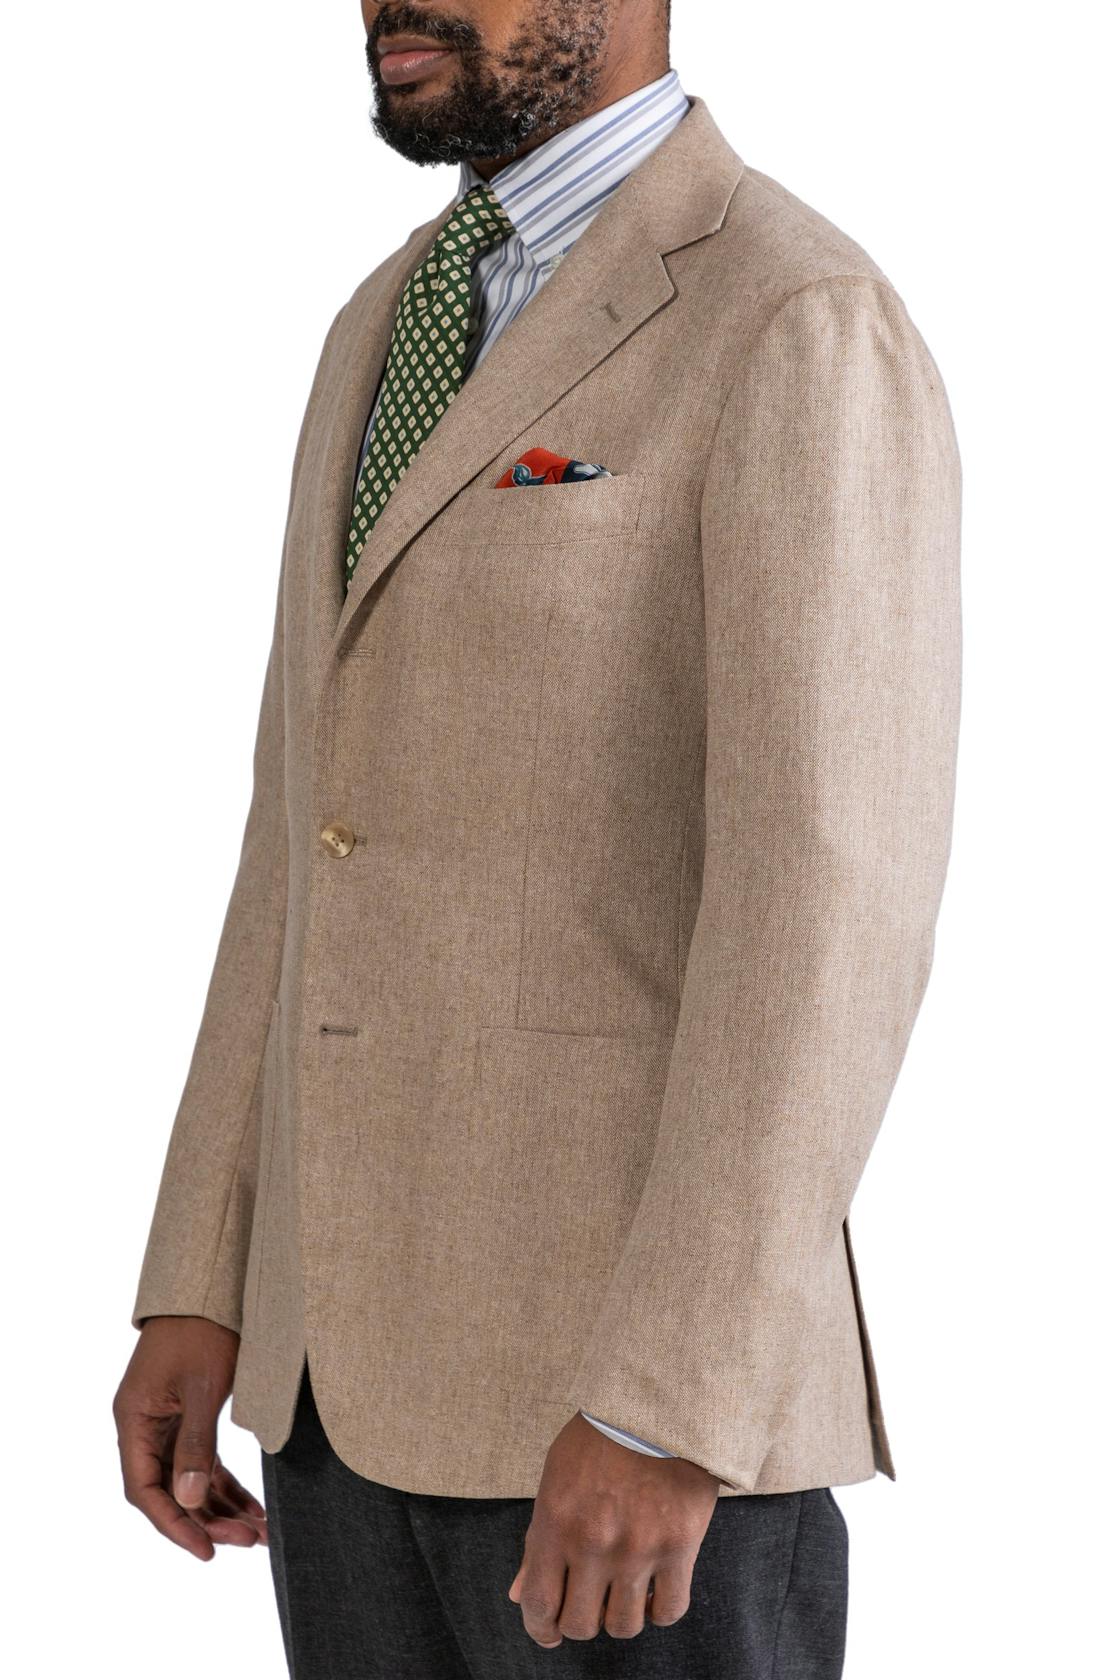 The Armoury by Ring Jacket Model 3 Beige Silk Sport Coat